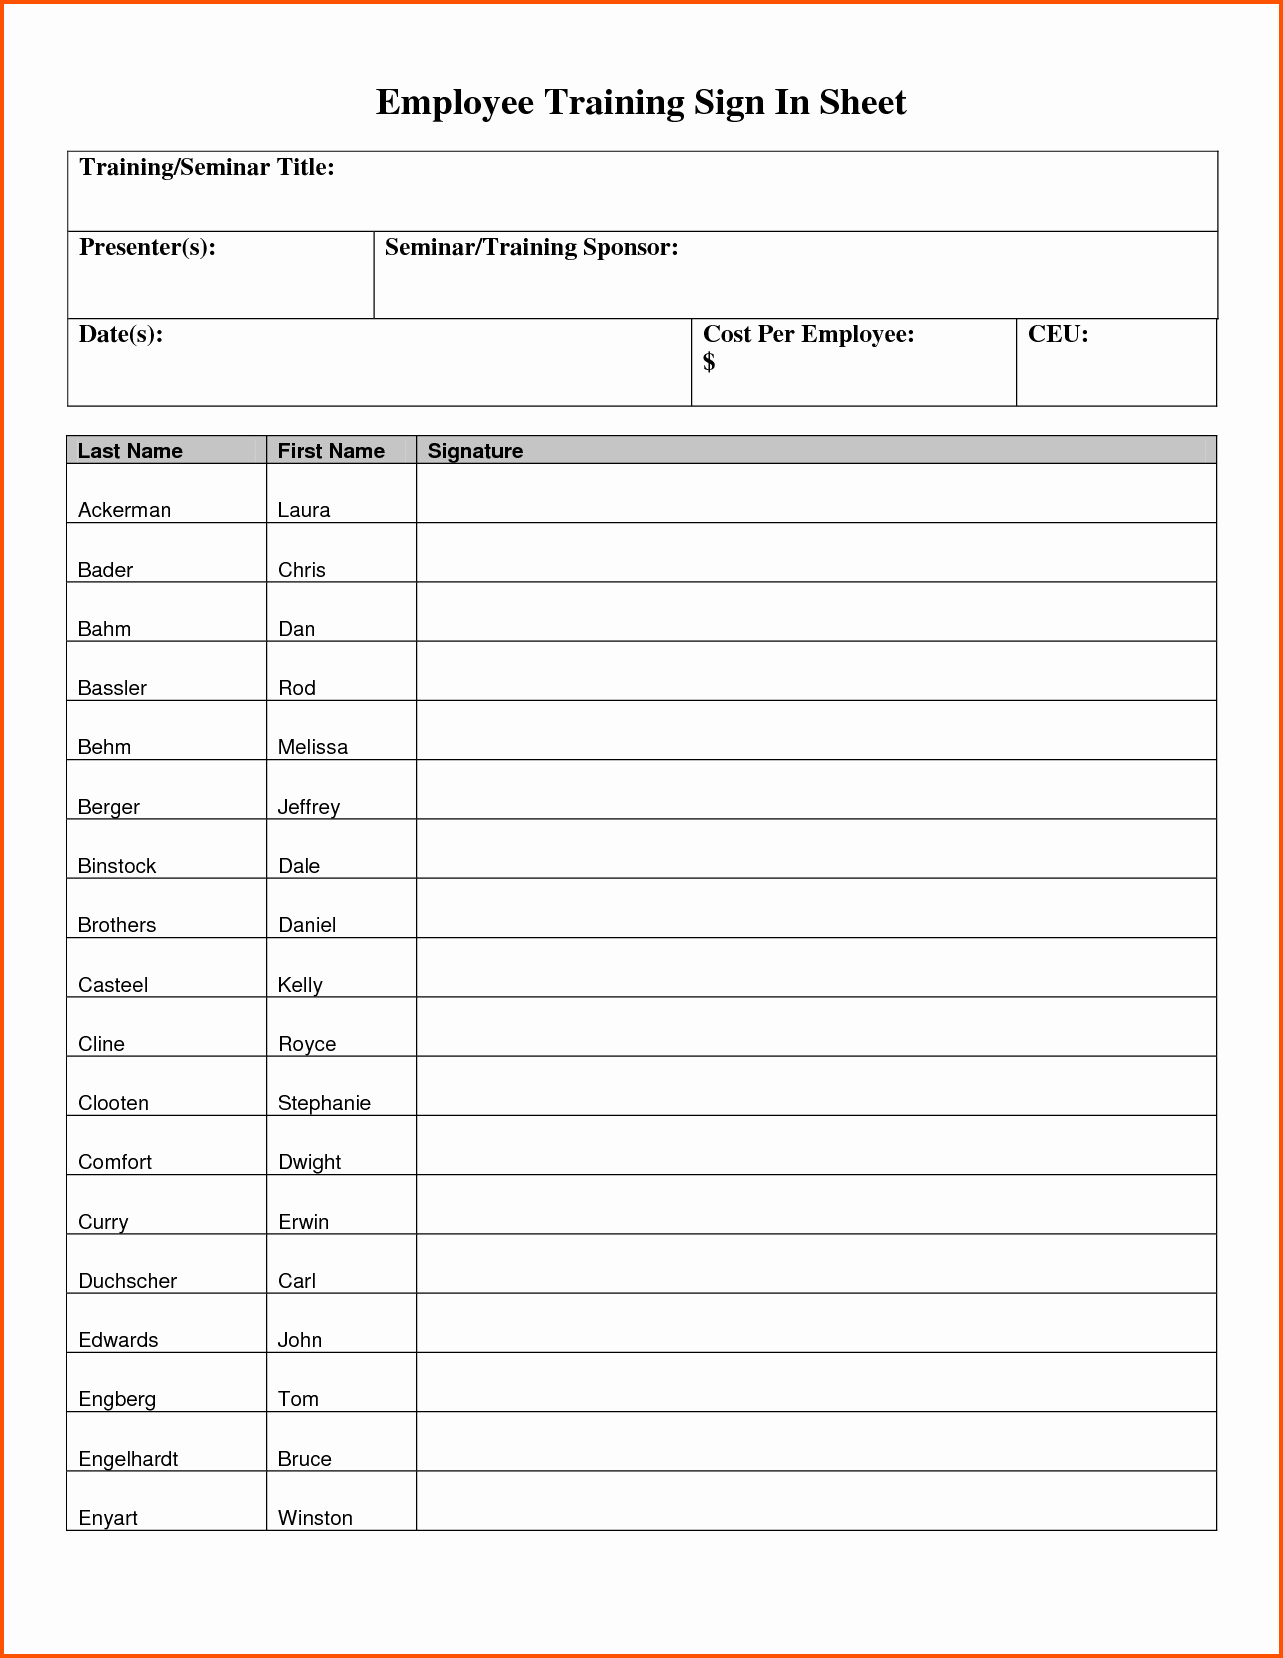 Employee Sign In Sheet Template New Privacy Document for Employees to Sign